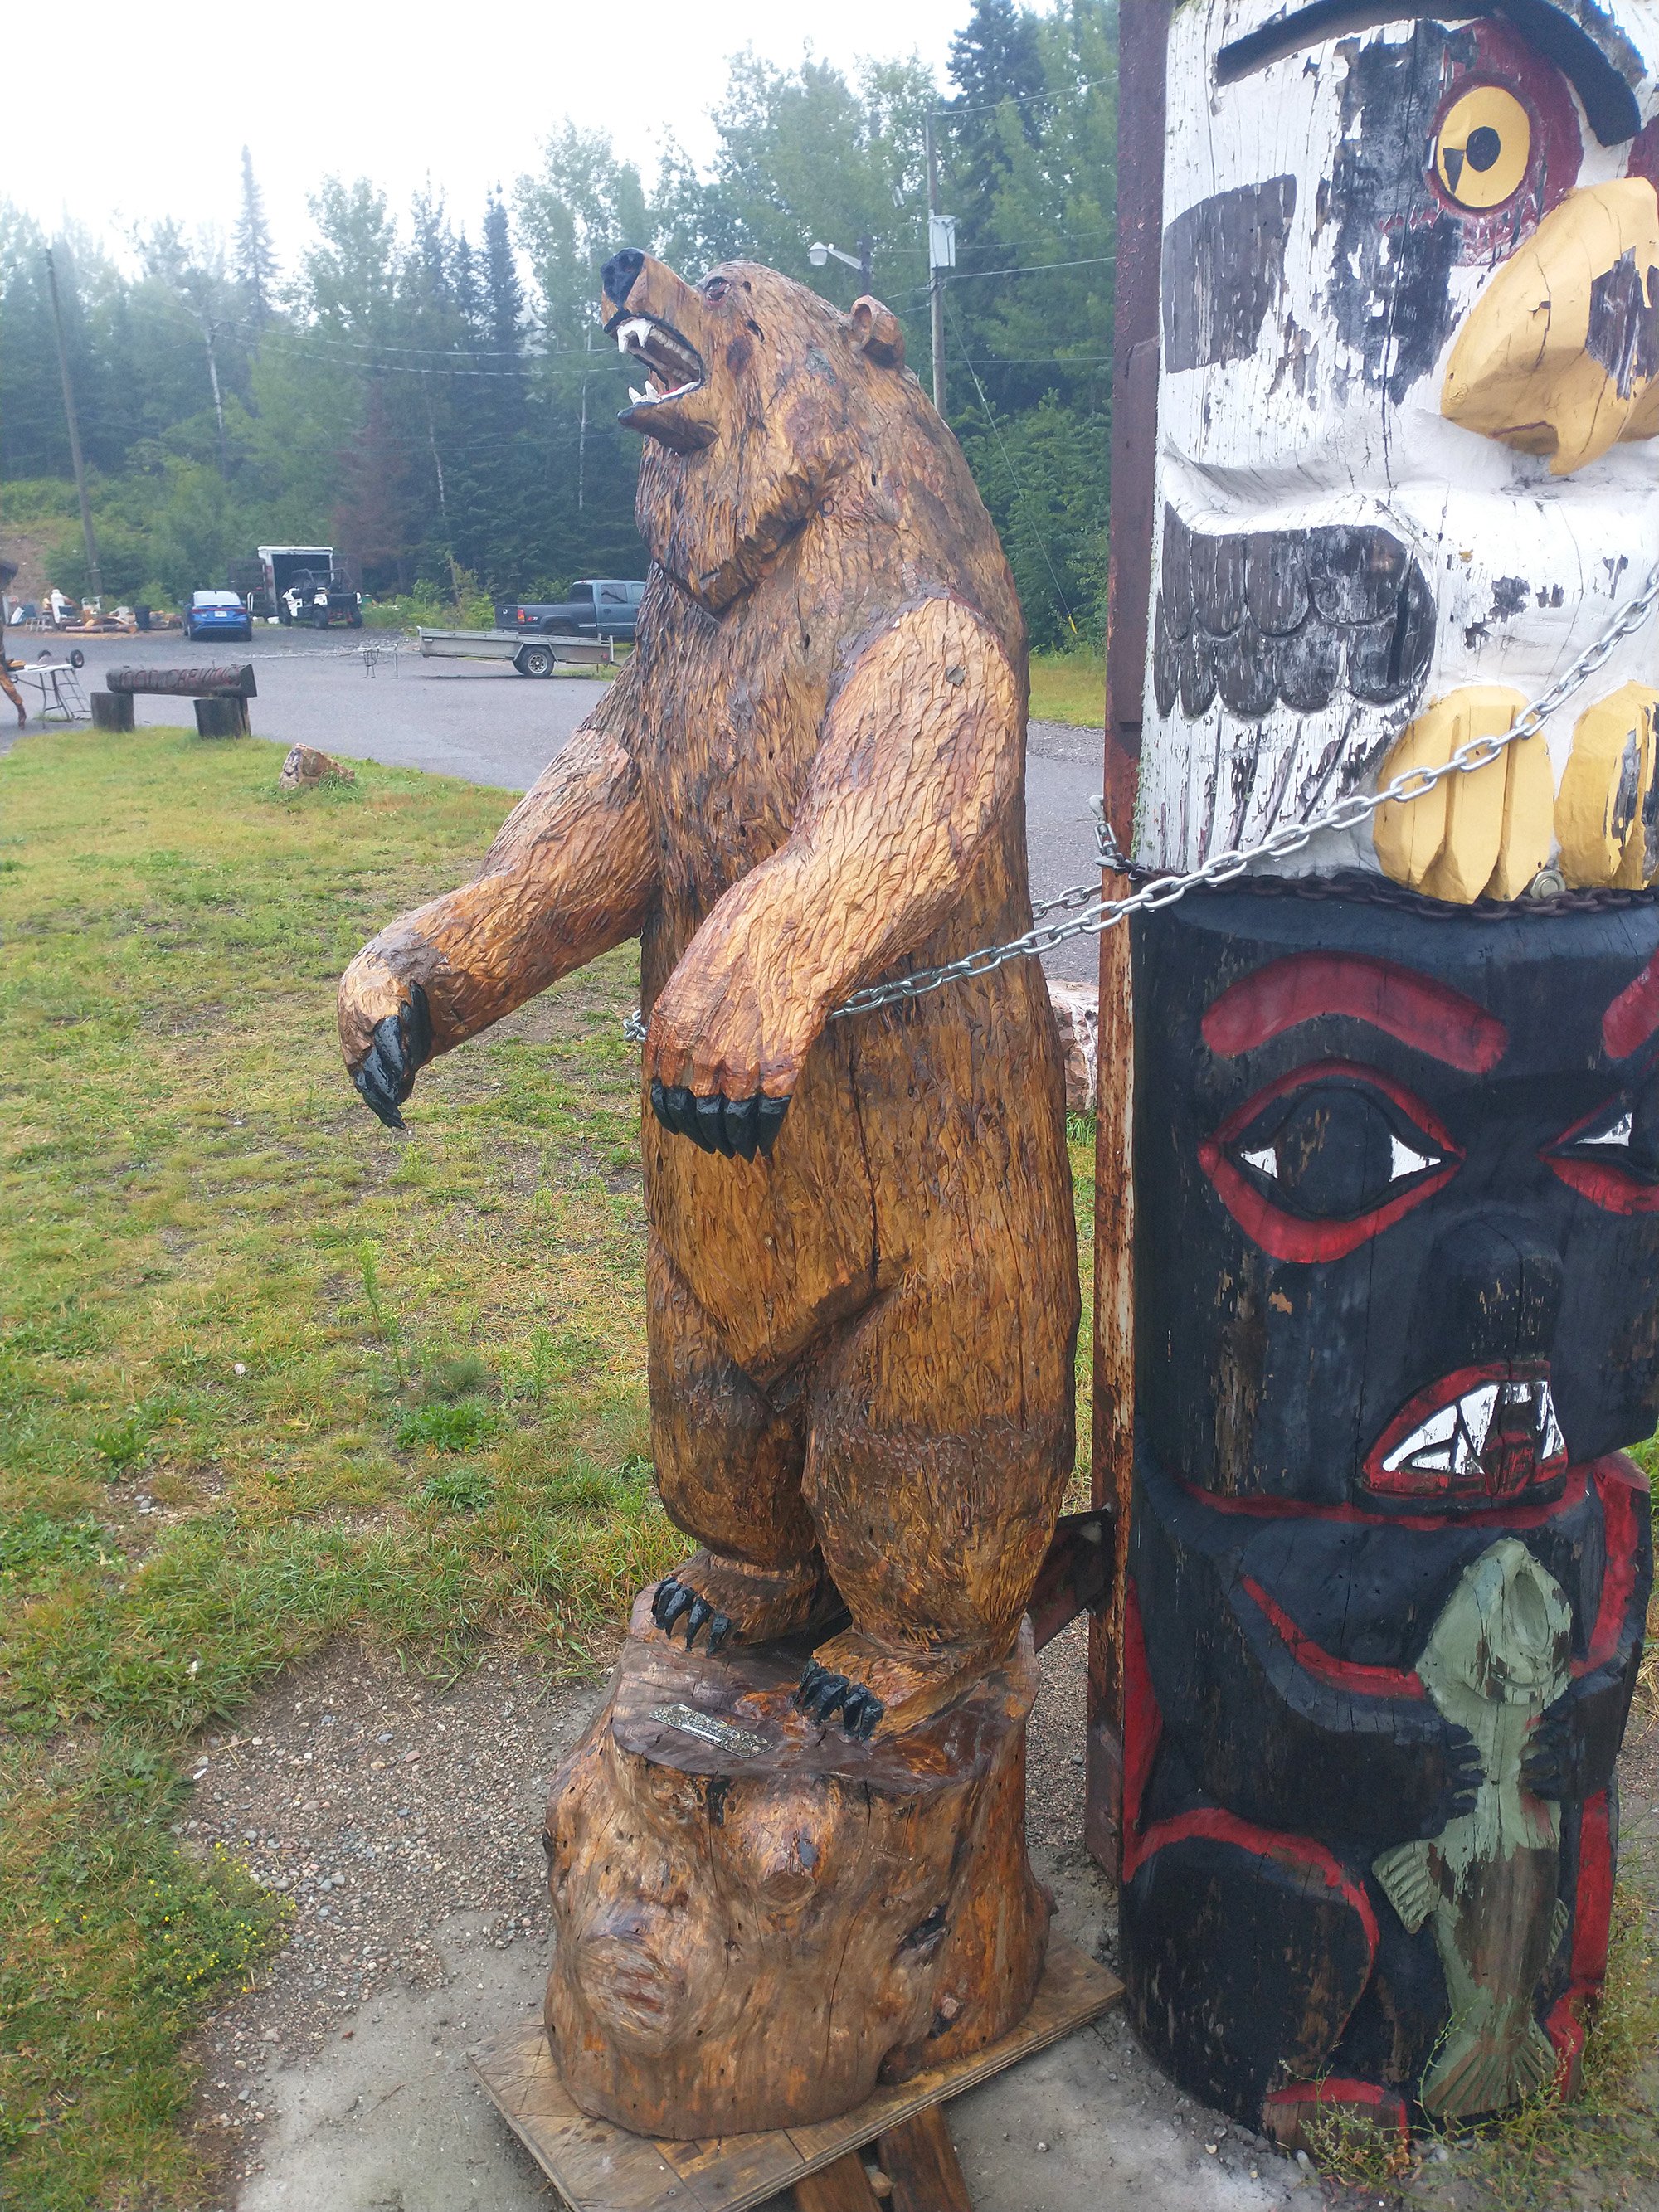 Activist bear chaining himself to the totem so loggers can't cut it down. Get a job hippie.